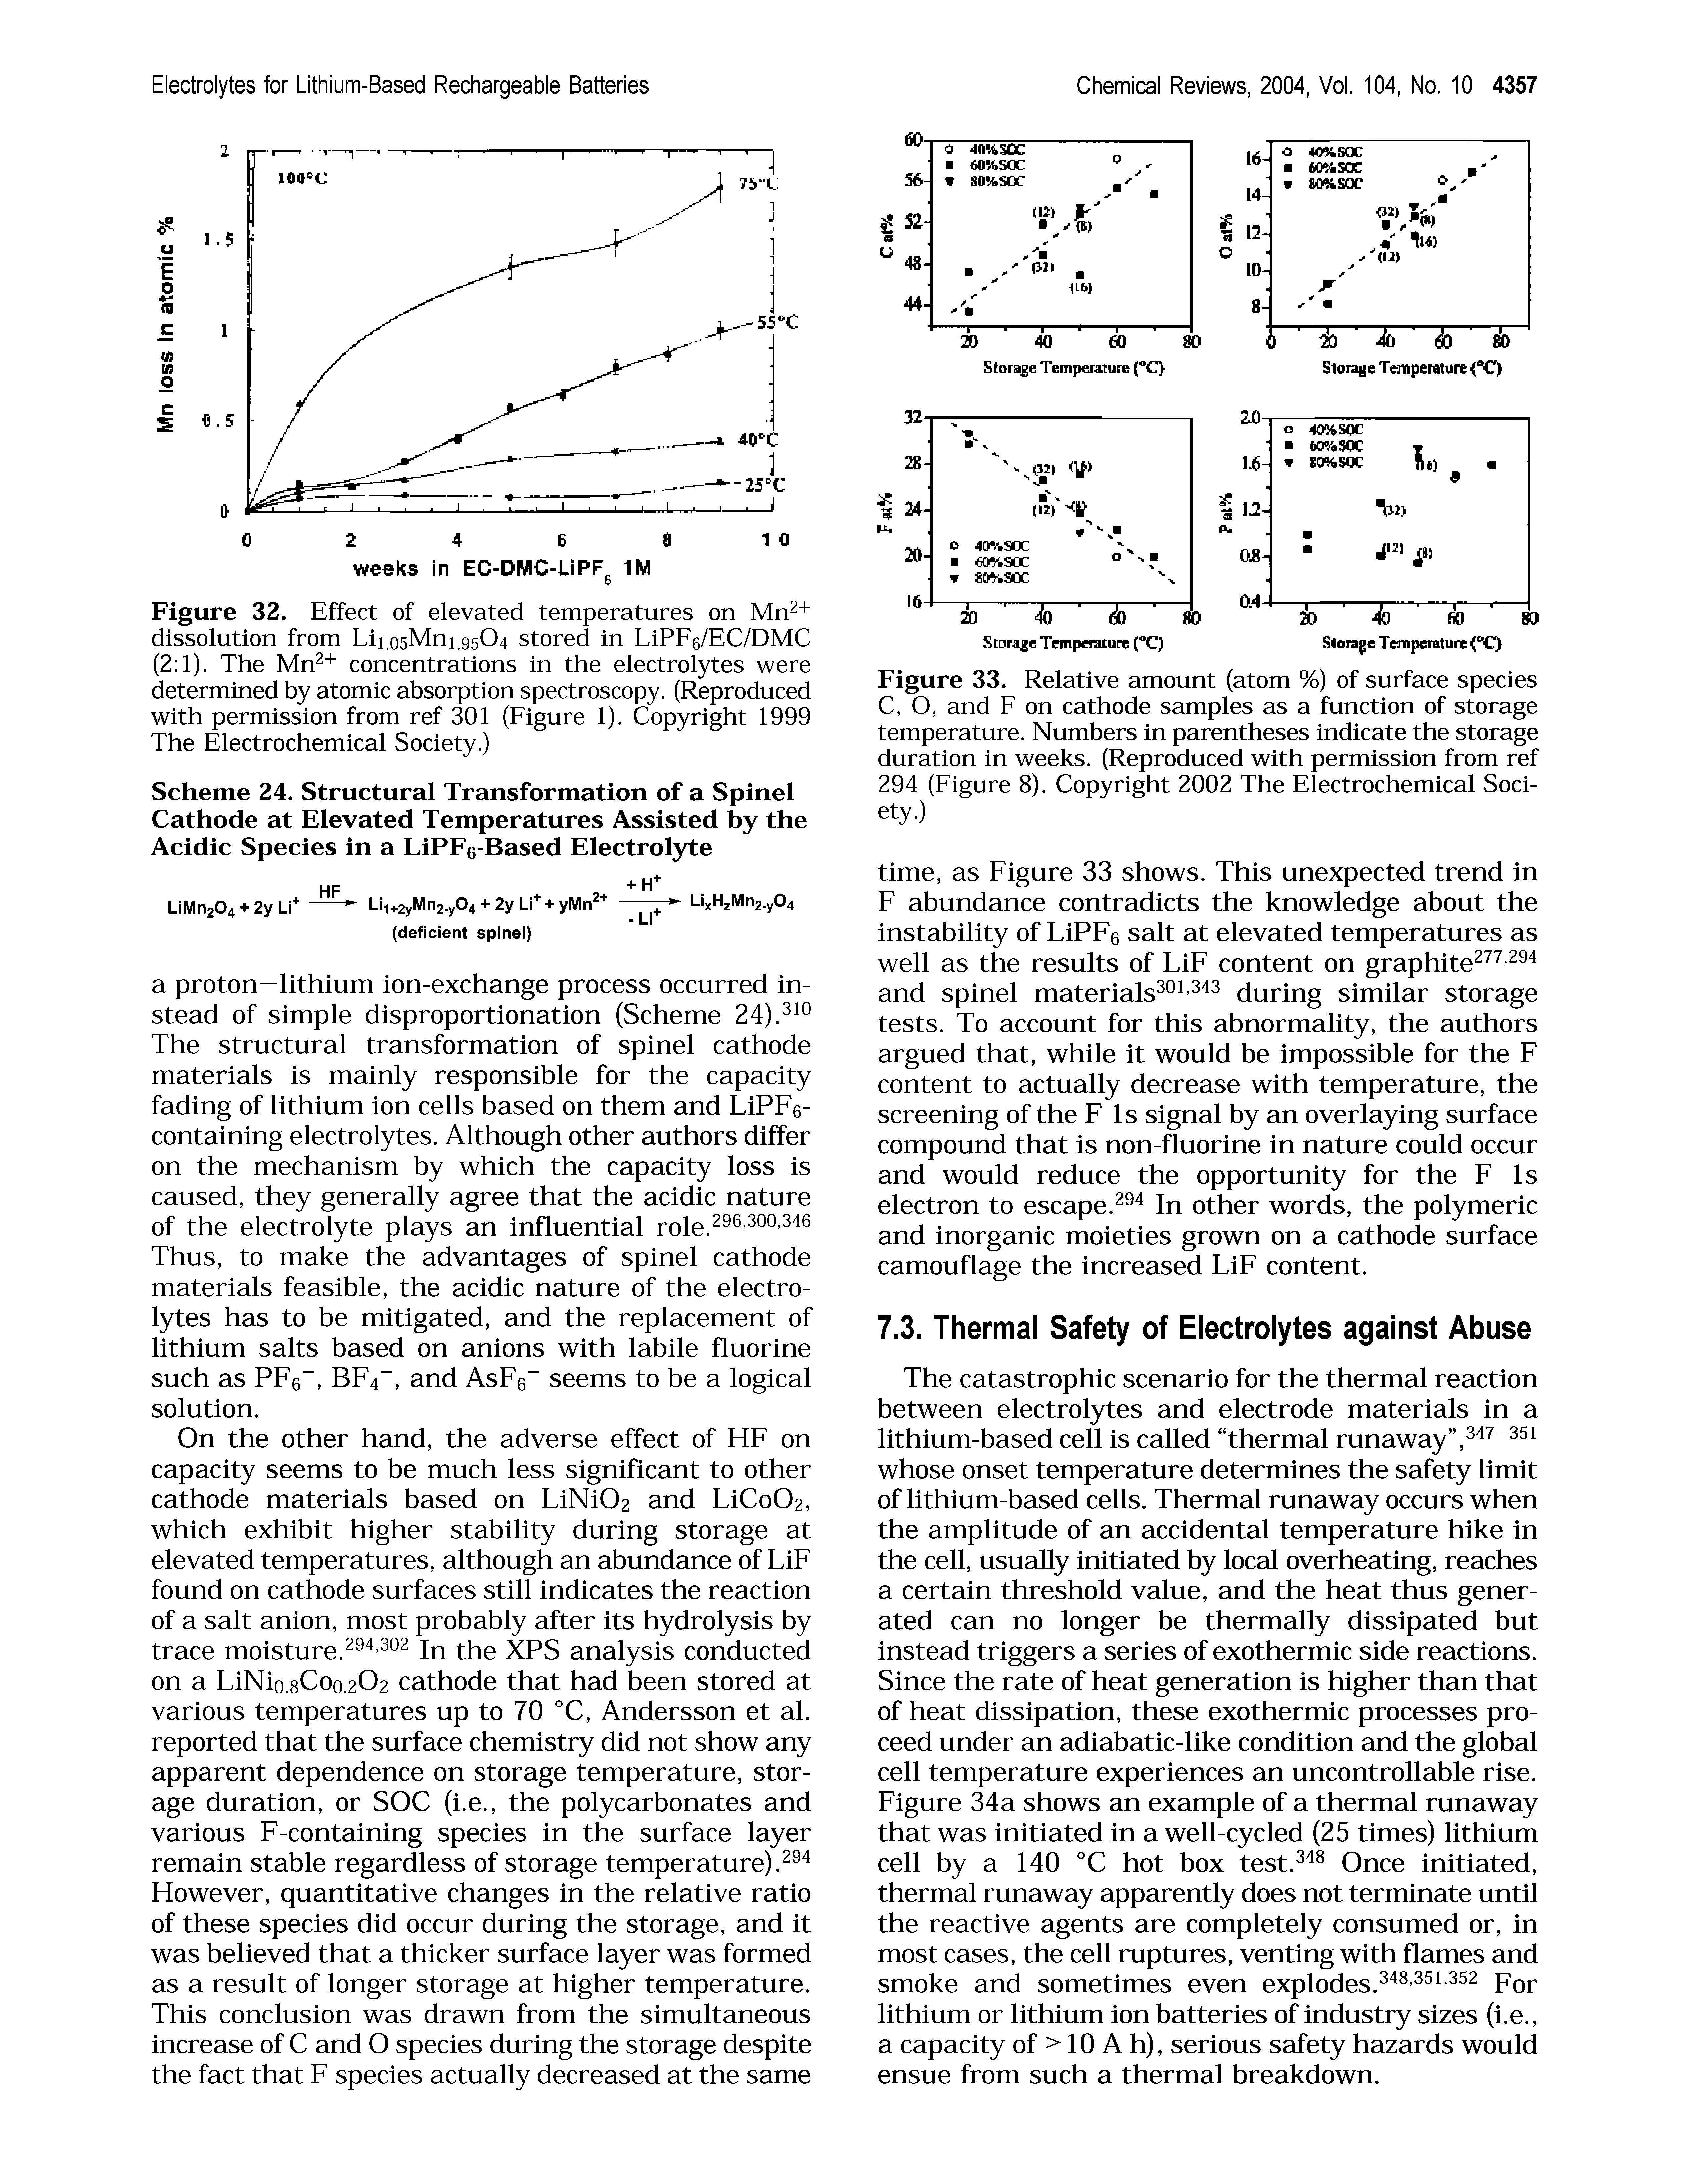 Figure 32. Effect of elevated temperatures on dissolution from Li1.05Mn1.95O4 stored in LiPFe/EC/DMC (2 1). The Mn + concentrations in the electrolytes were determined by atomic absorption spectroscopy. (Reproduced with permission from ref 301 (Figure 1). Copyright 1999 The Electrochemical Society.)...